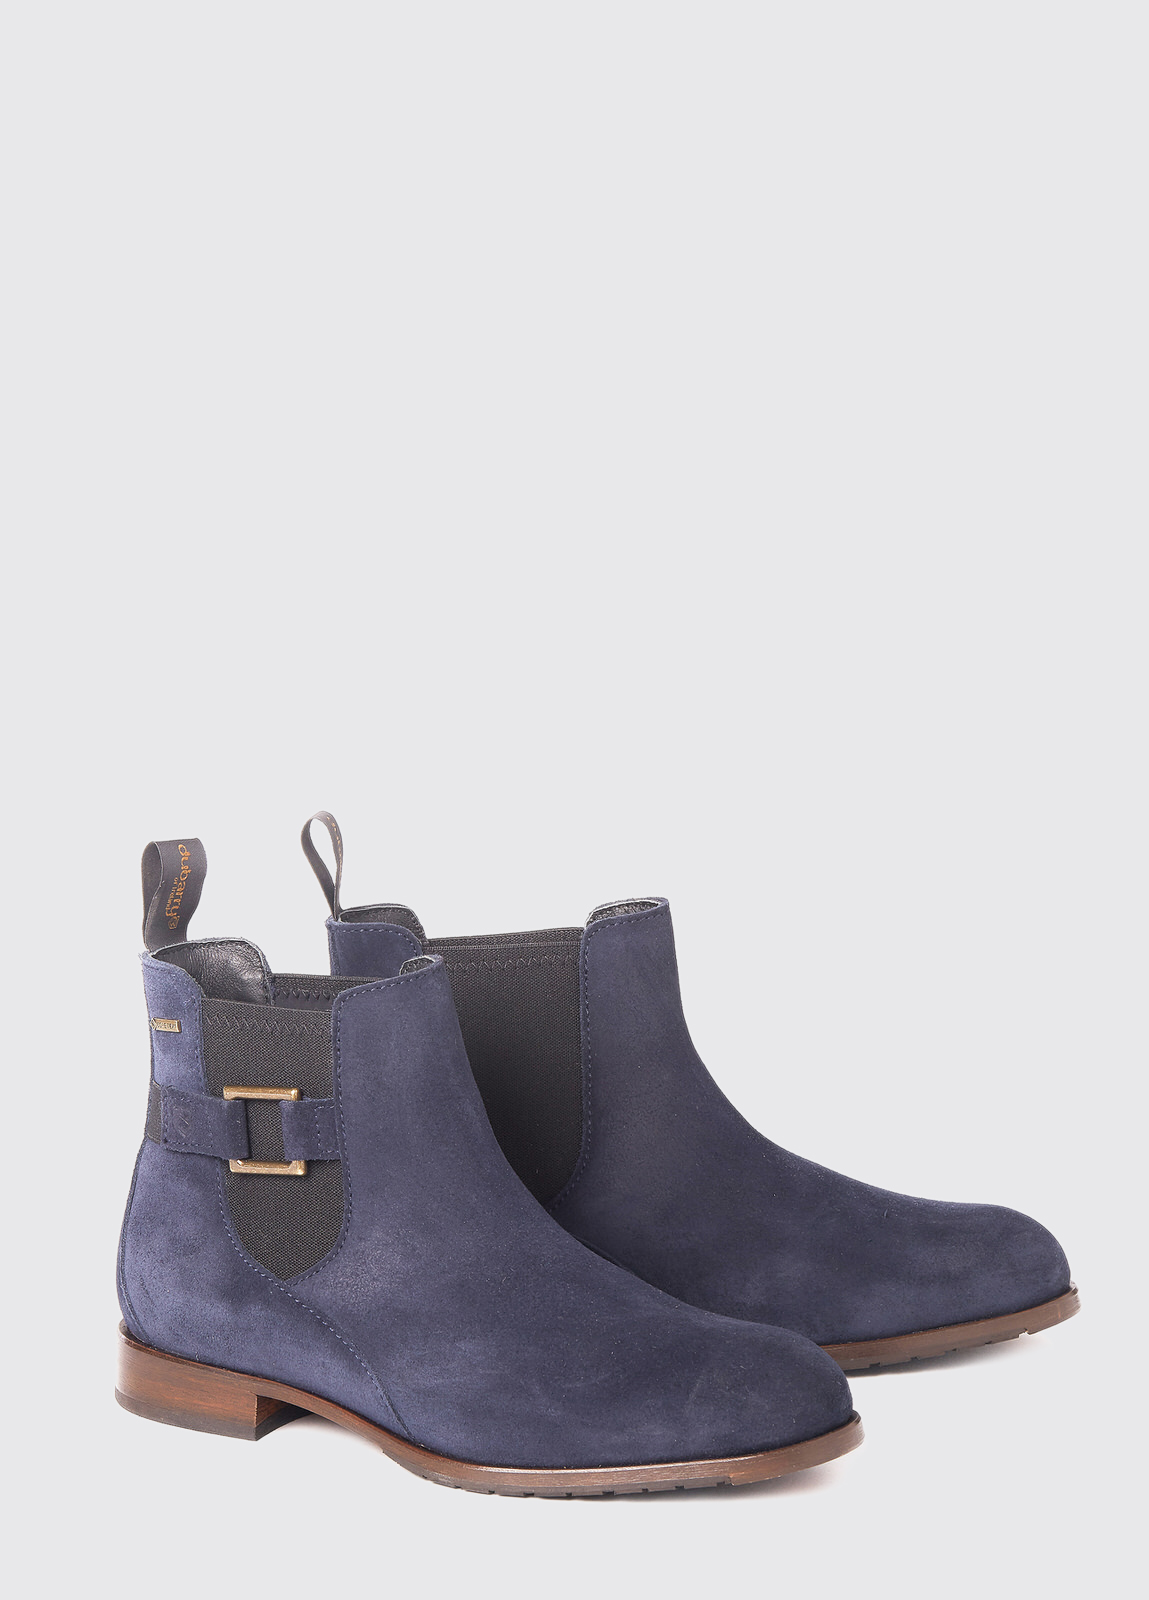 navy ankle boots ireland